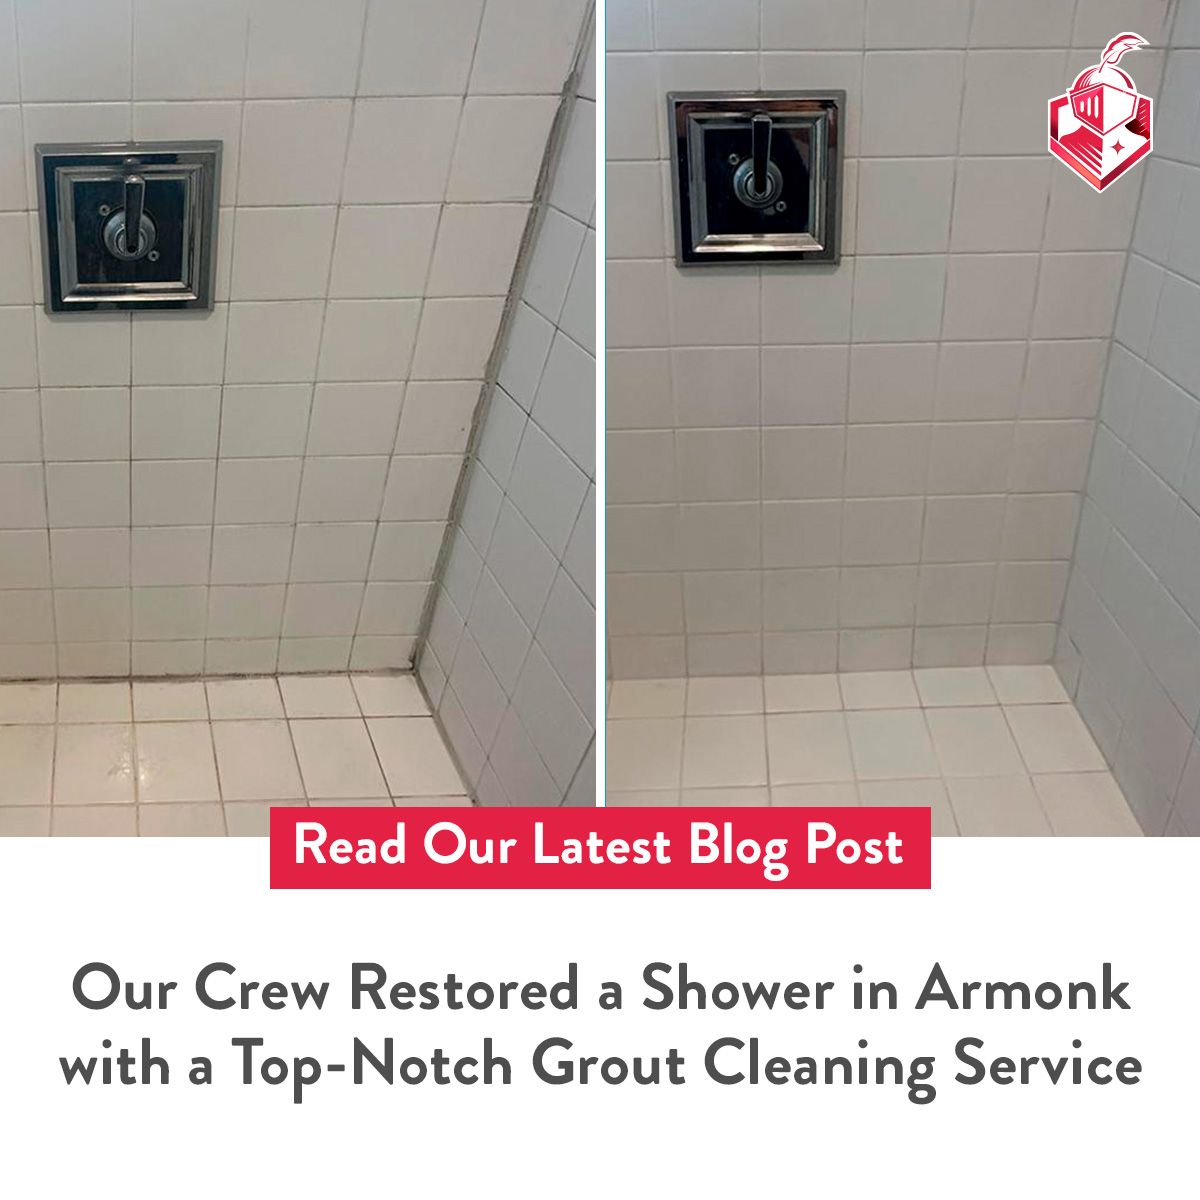 Our Crew Restored a Shower in Amornk with a Top-Notch Grout Cleaning Service